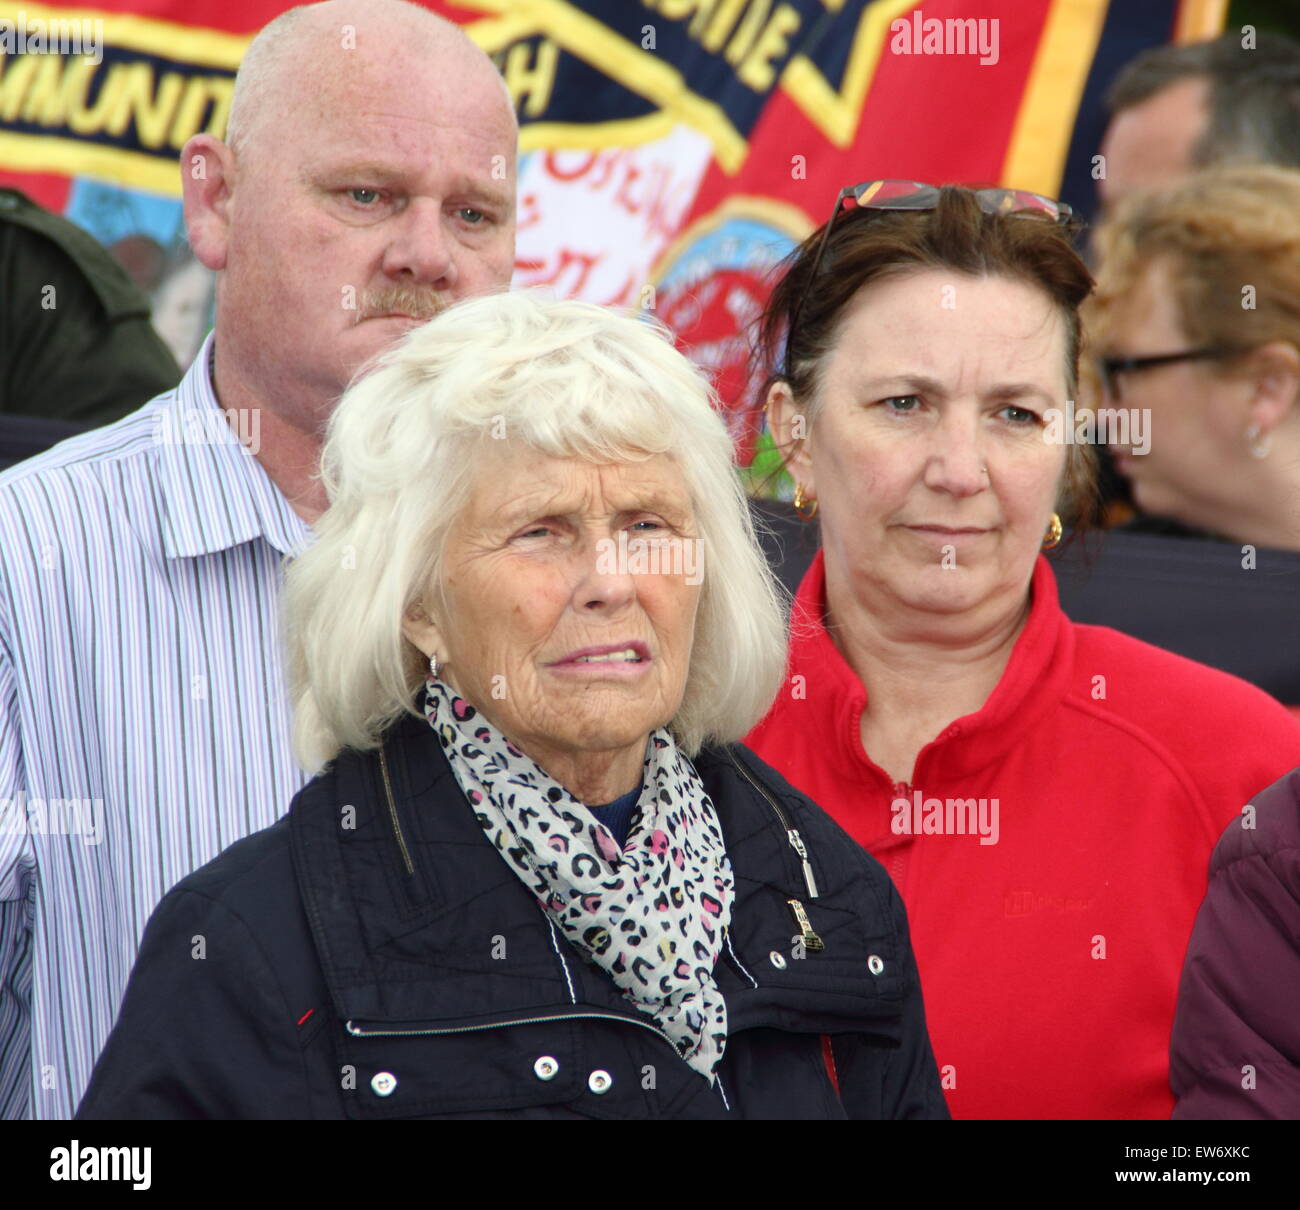 Orgreave, South Yorkshire, UK. 18 June 2015. Anne Scargill (centre front), former wife of miners’ strike leader, Arthur Scargill attends a rally organised by the Orgreave Truth and Justice Campaign (OTJC) at Orgreave to mark the 31st anniversary of the Battle of Orgreave, a violent confrontation between miners and police that took place during the year long miners’ strike in 1984-85. Credit:  Deborah Vernon/Alamy Live News Stock Photo